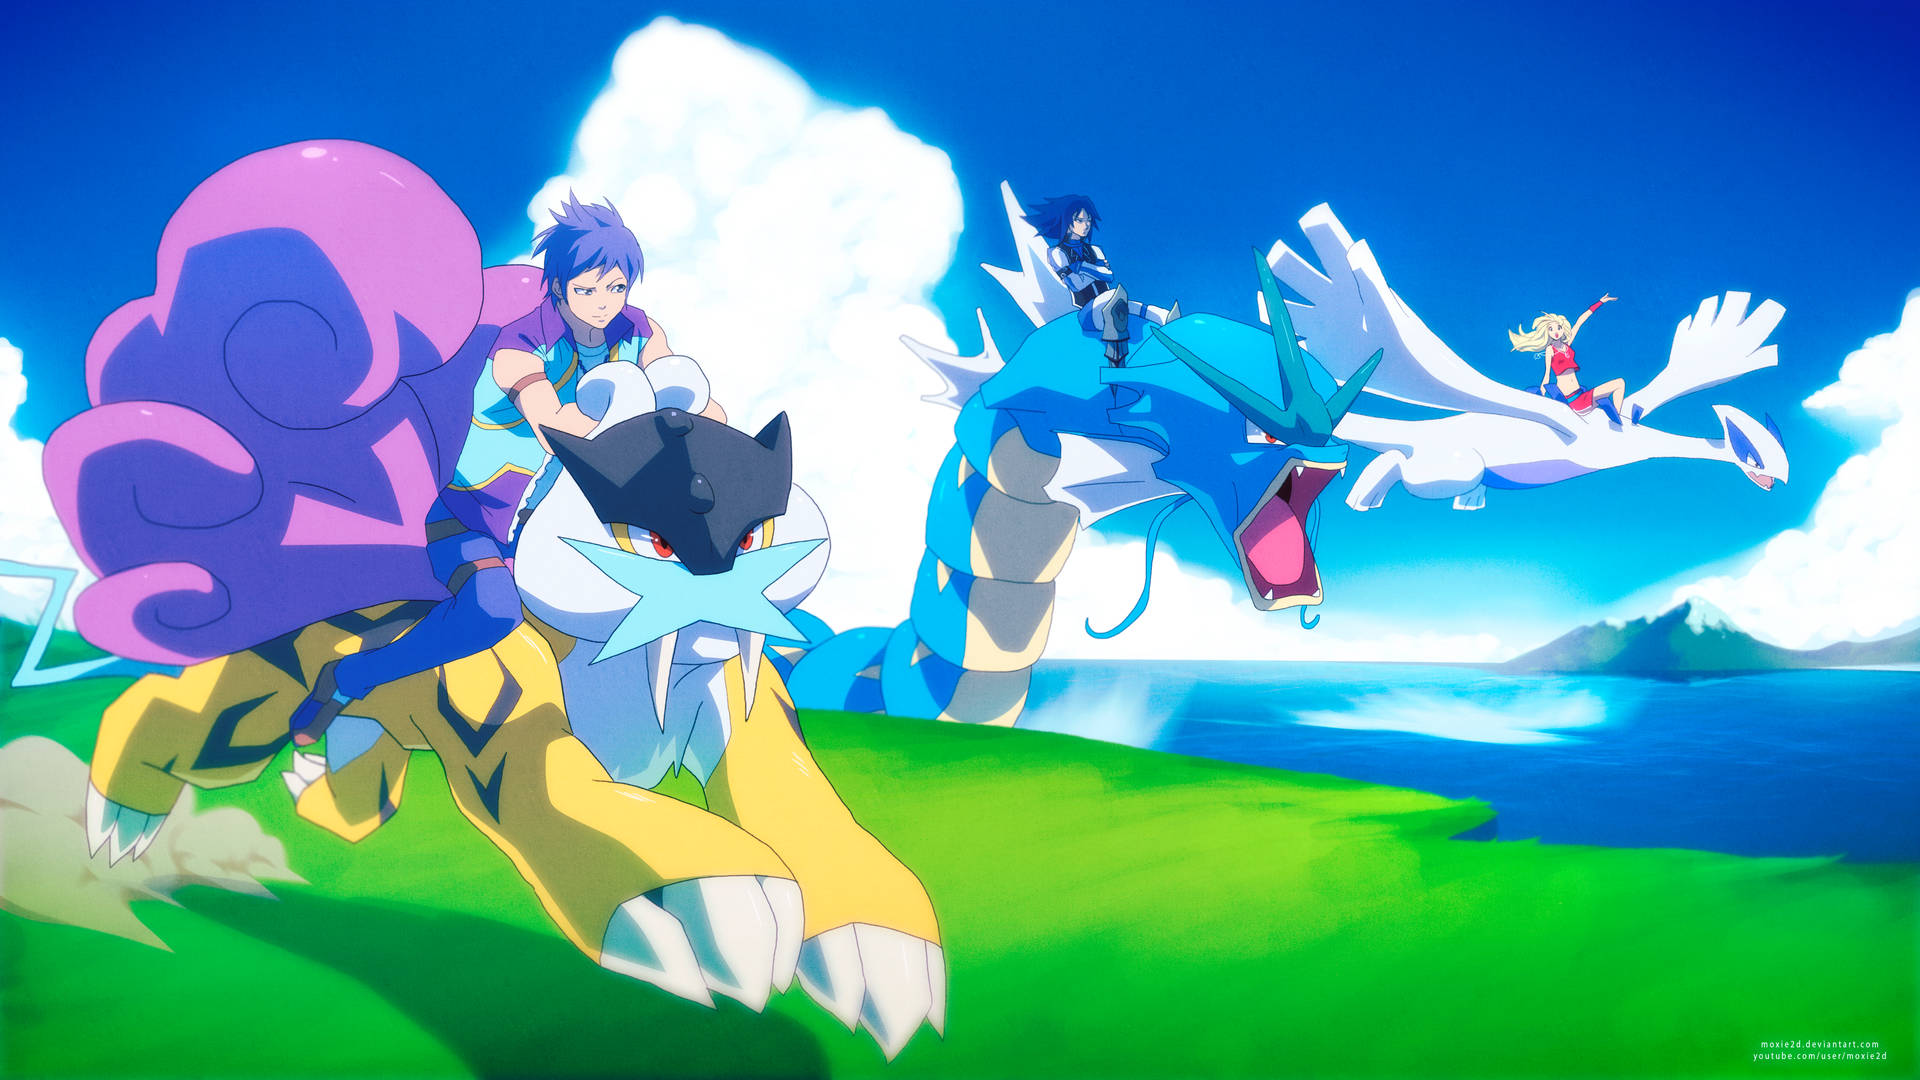 Lugia's Powerful Pokemon Team Joining Forces For The Greatest Battle